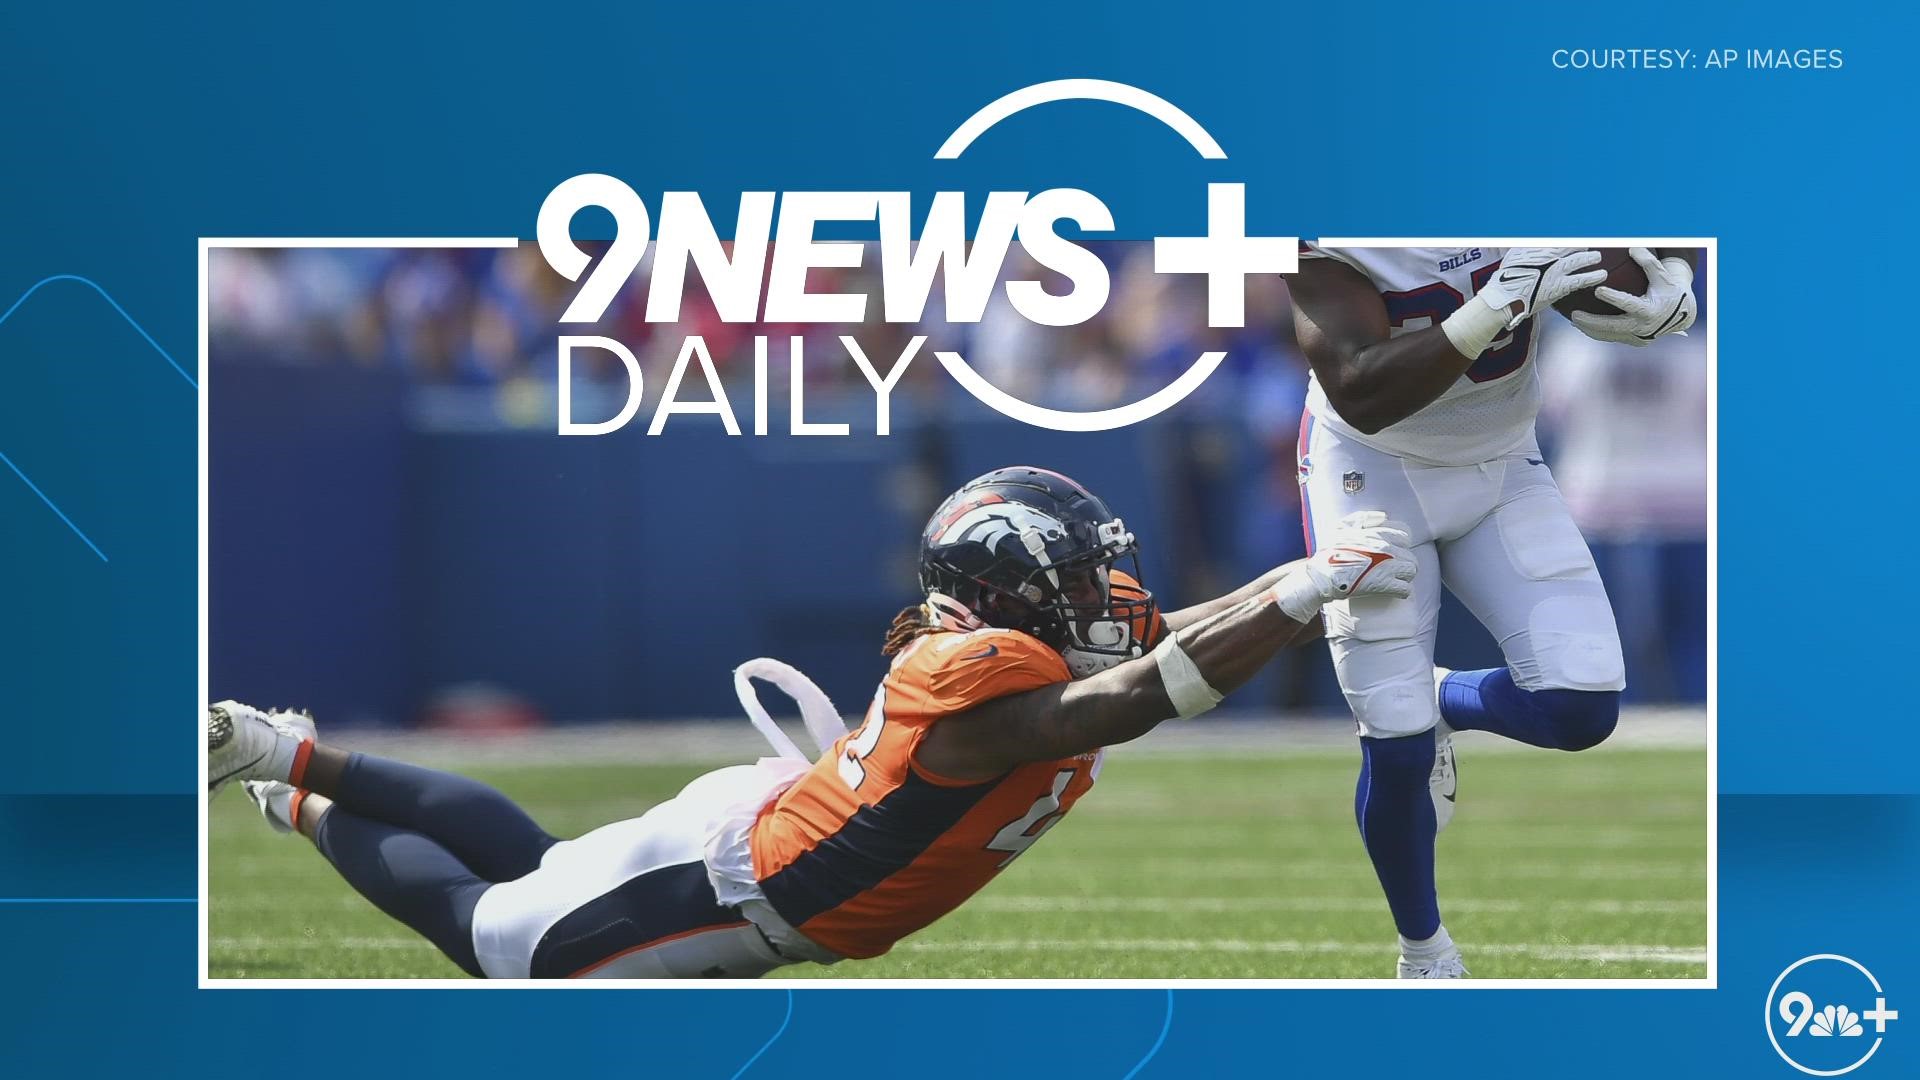 9NEWS Sport Director Rod Mackey goes over some top takeaway from the Denver Broncos' second preseason game and previews their final preseason game against the Vikes.